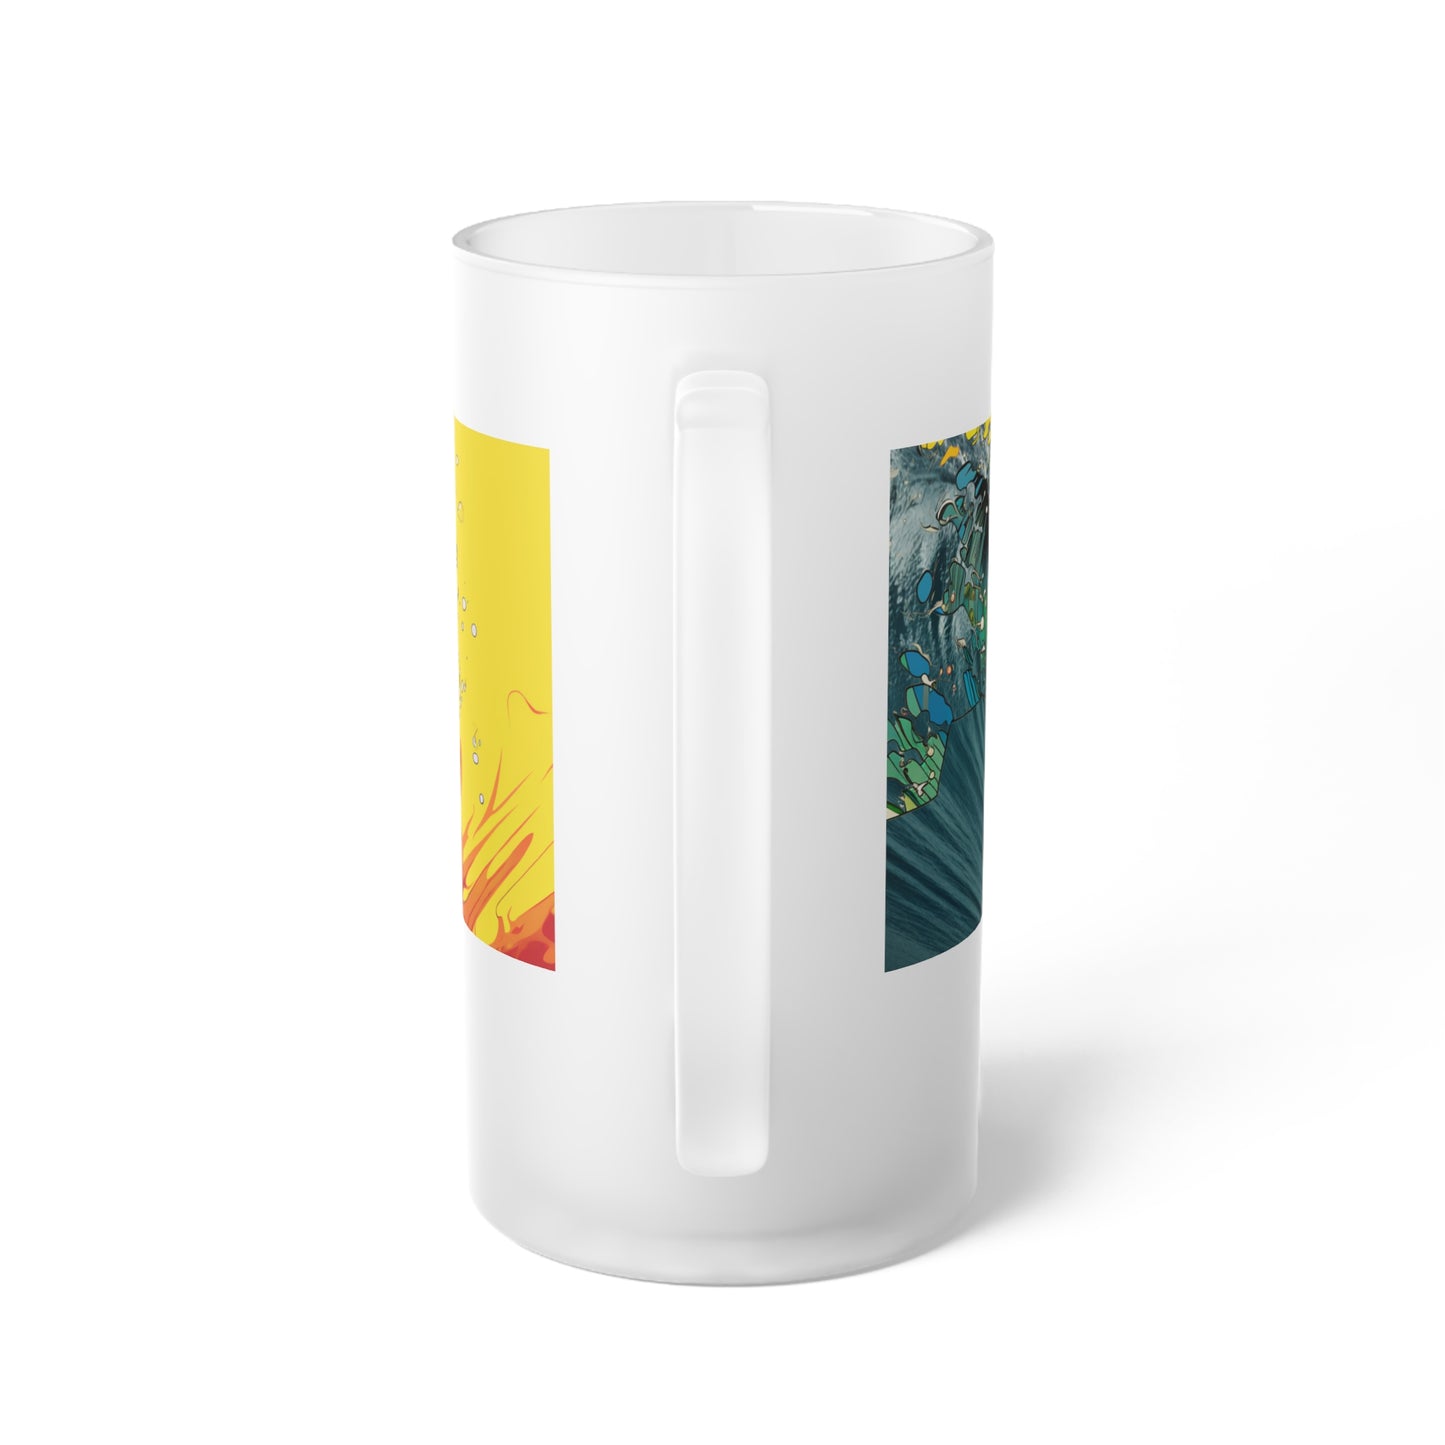 Experience the magic of a mid-air surfer in our Mixed Media Surfer Frosted Glass Beer Mug, Design #063. Your glassware, your ticket to psychedelic beach dreams, exclusively at Stashbox.ai.Immerse yourself in a psychedelic beach experience with our Mixed Media Surfer Frosted Glass Beer Mug, Design #063. Your glassware, your whimsical beach escape, exclusively at Stashbox.ai.